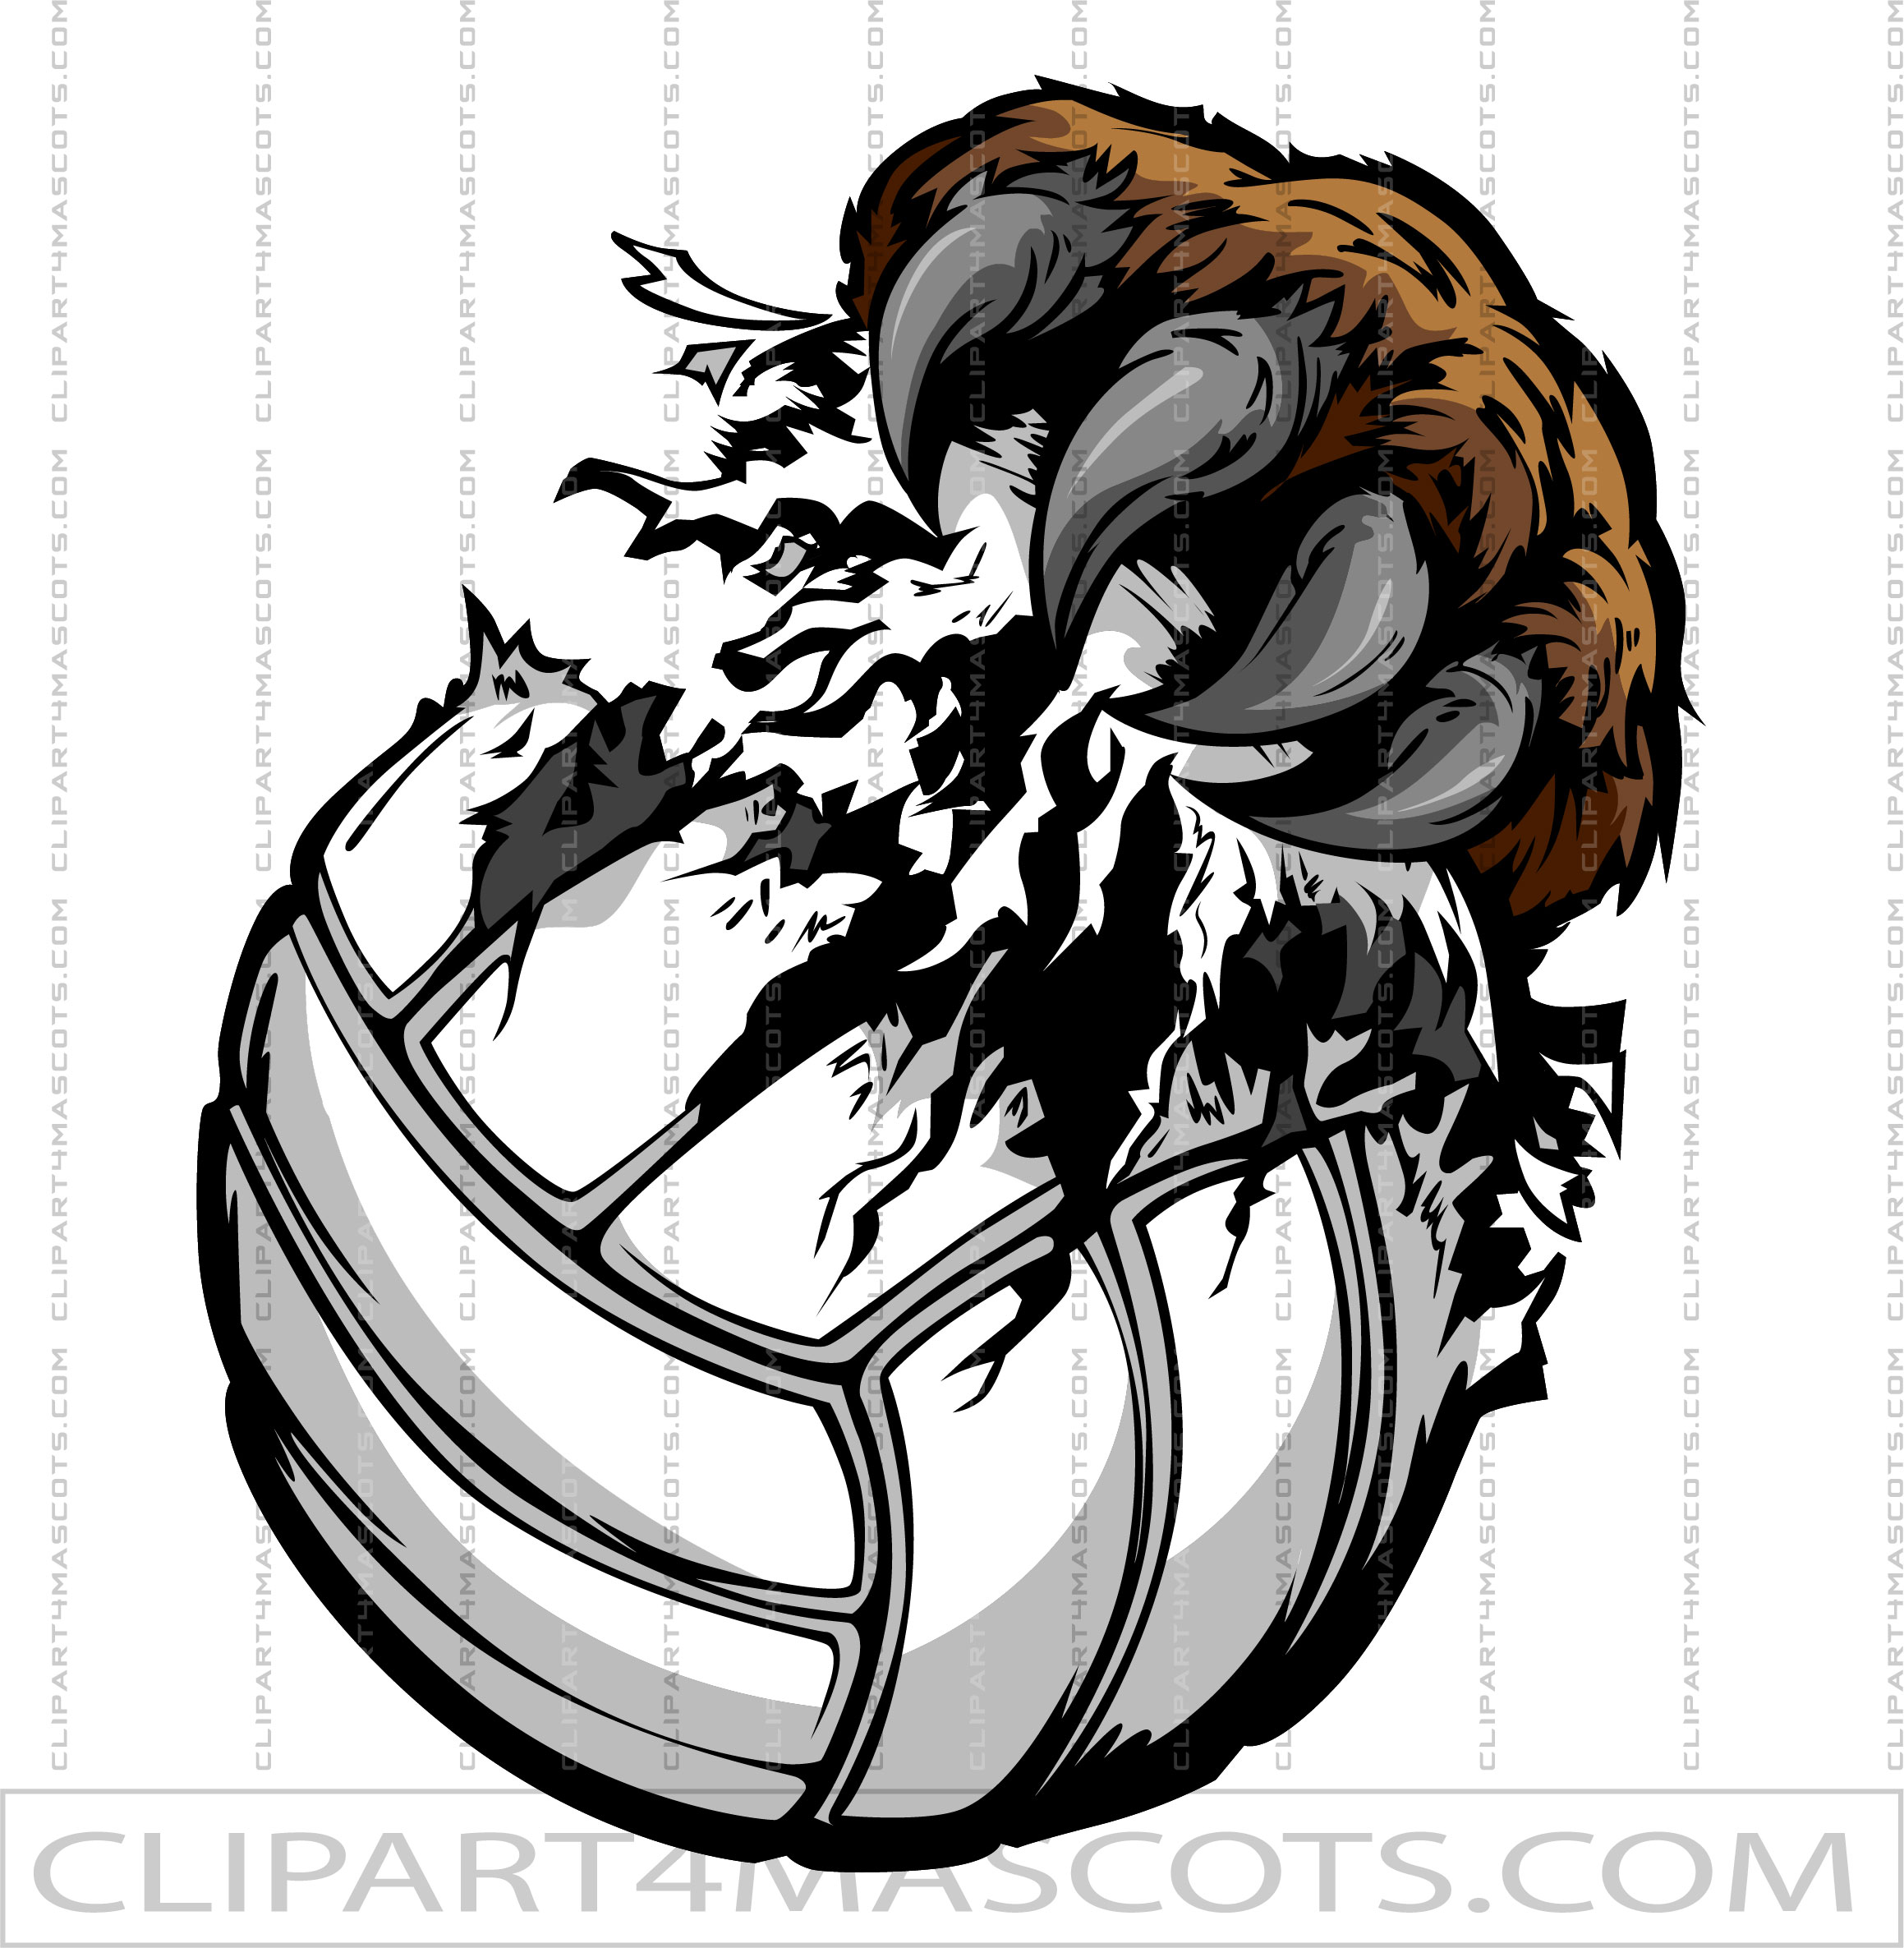 Volleyball Bruin Claw